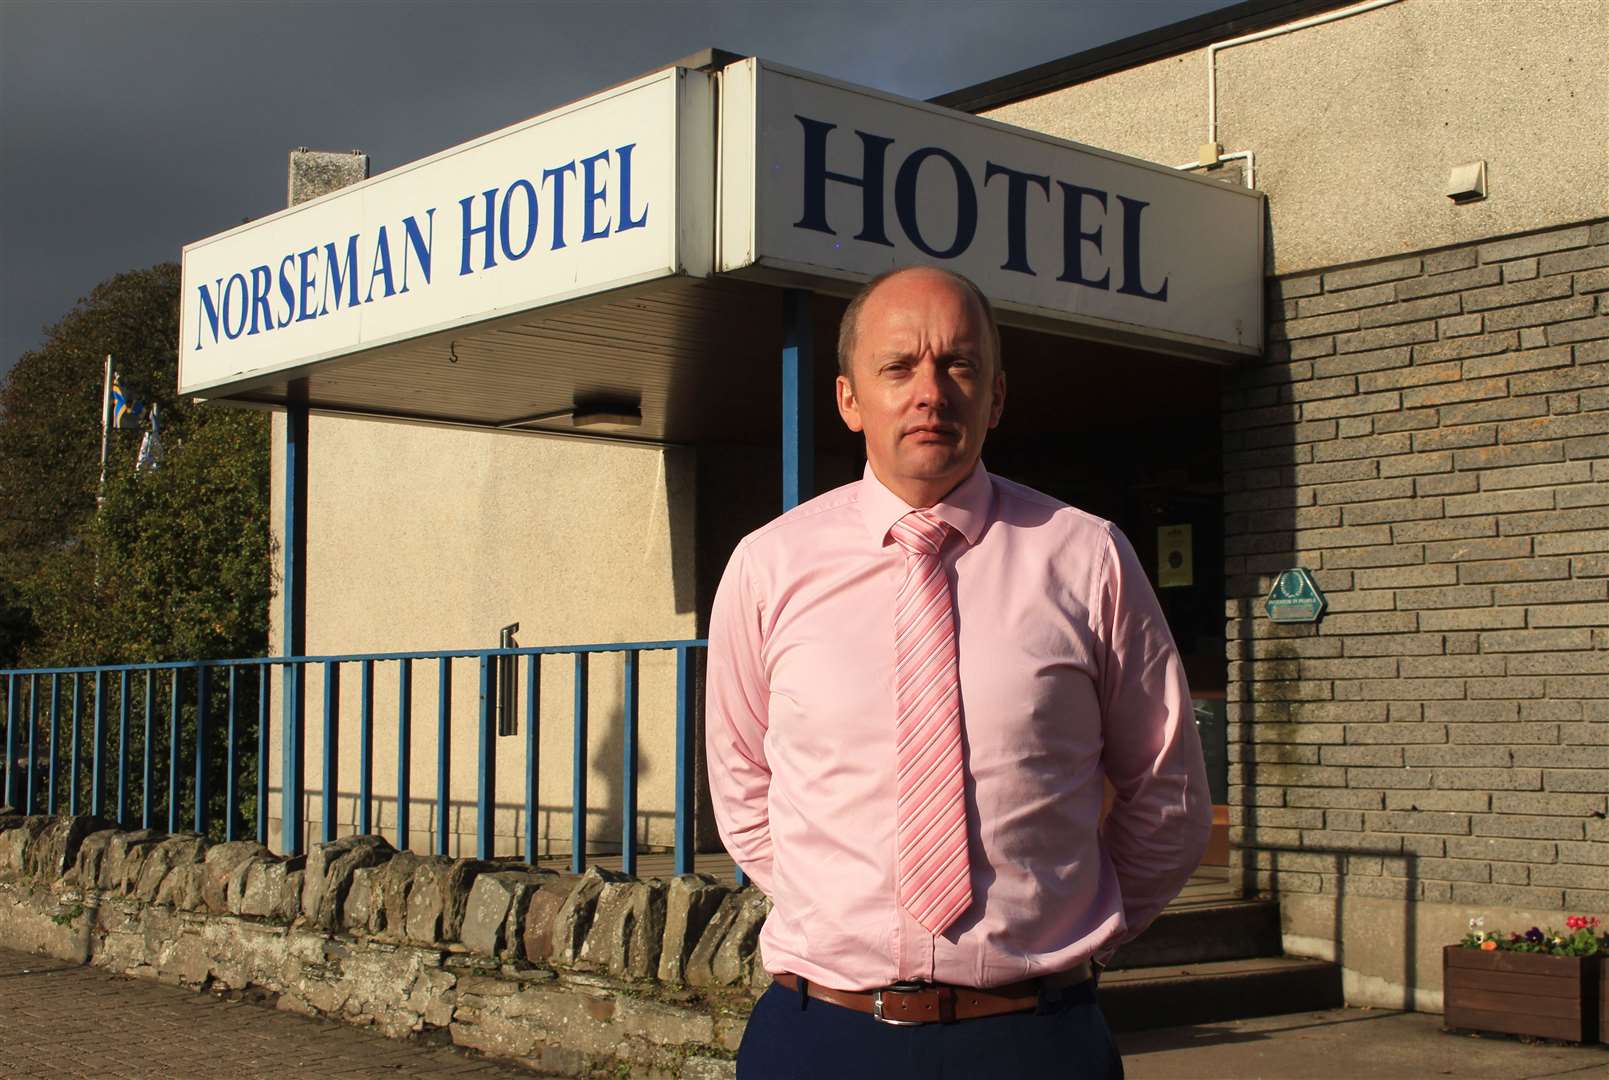 Andrew Mackay, owner of the Caithness Collection of hotels, says the new course offers 'a perfect blend of learning and on-the-job experience'.